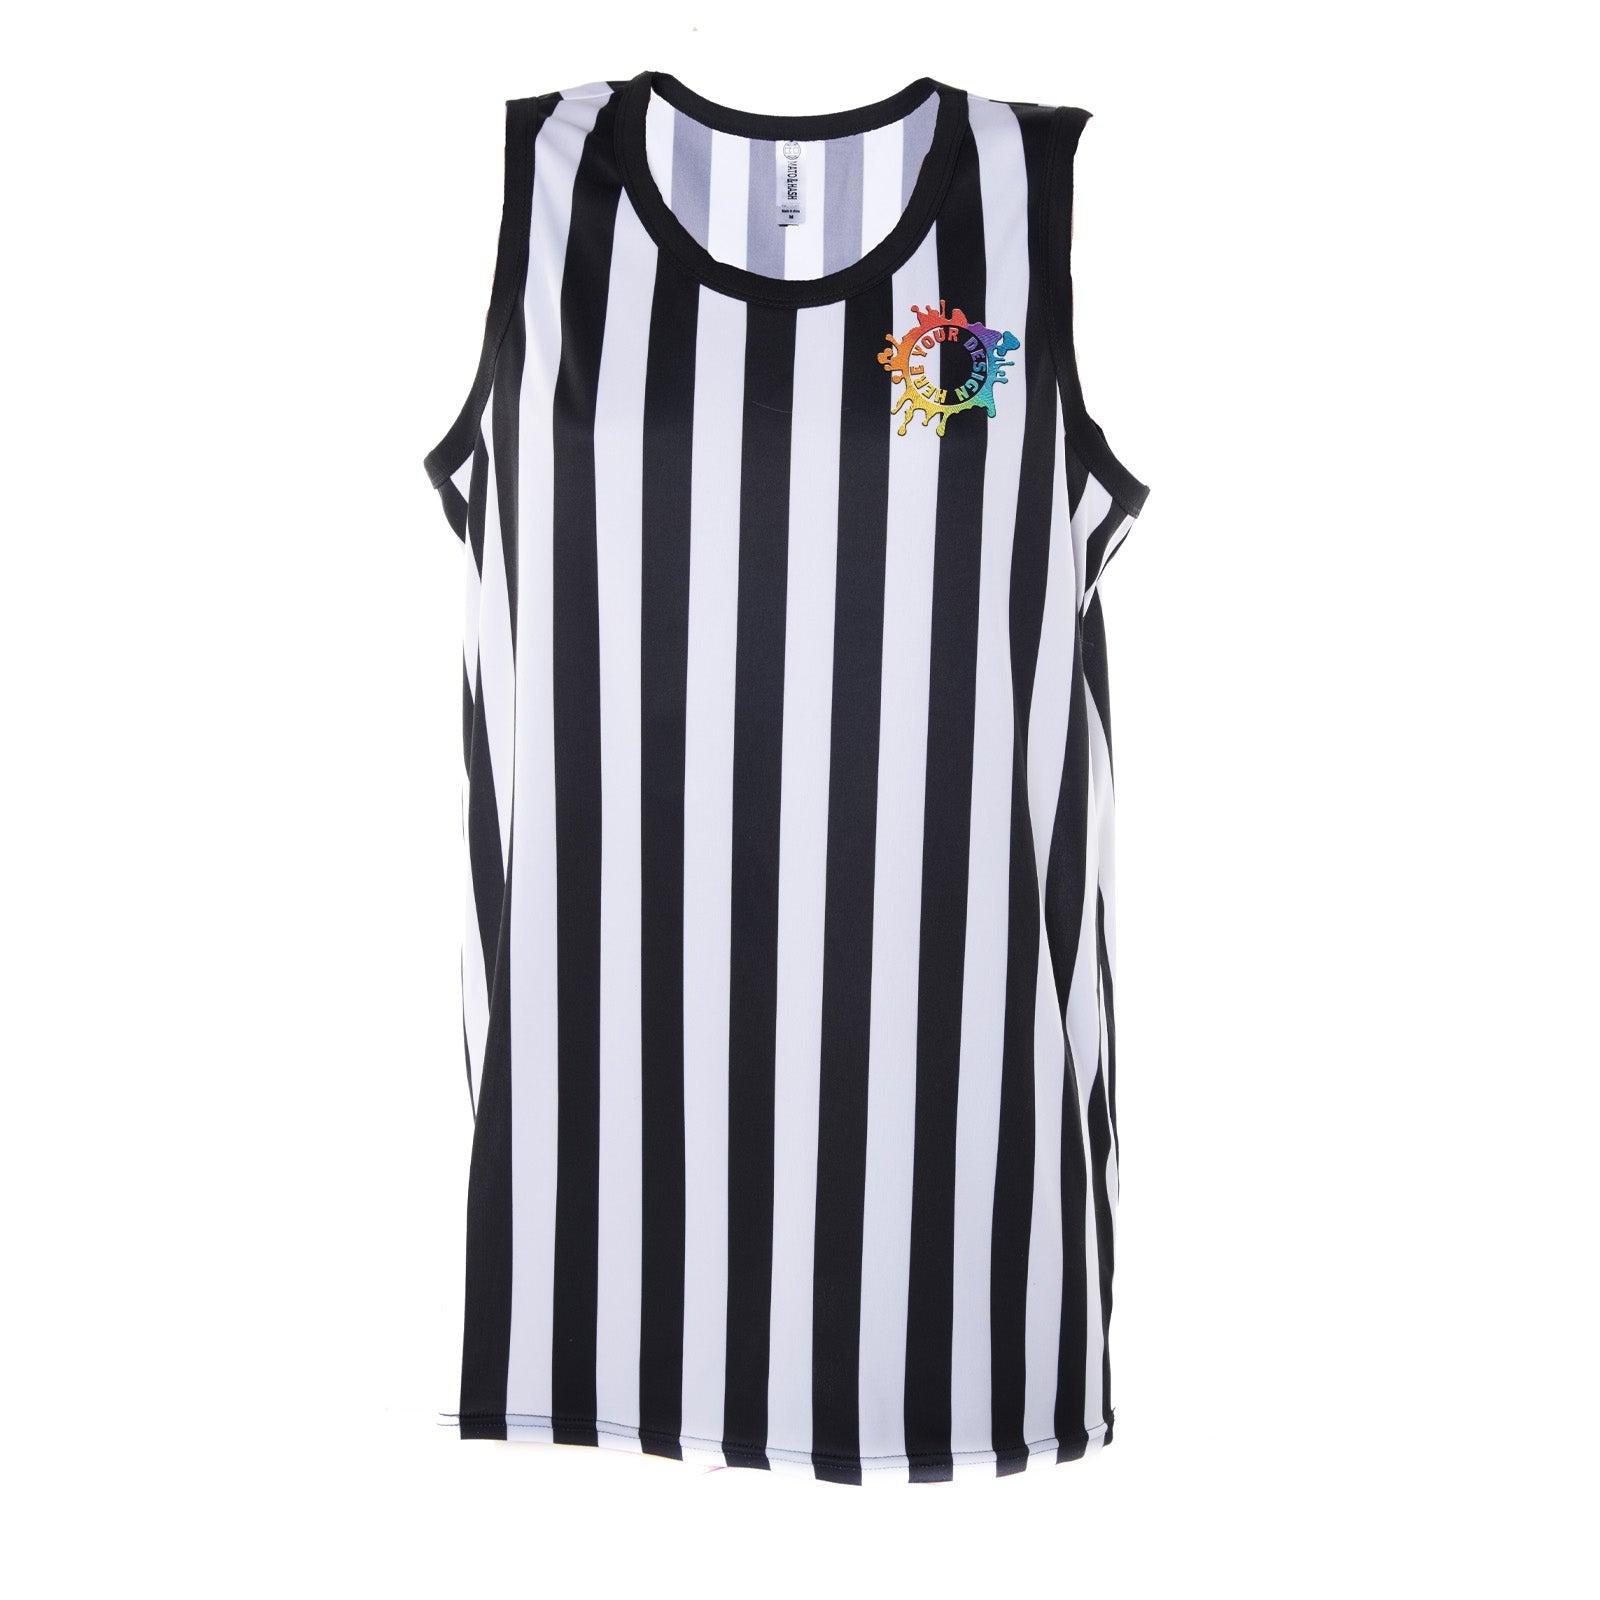 Mato & Hash Men's Referee Tank Top Shirt For Uniforms or Costumes W/ Embroidery - Mato & Hash